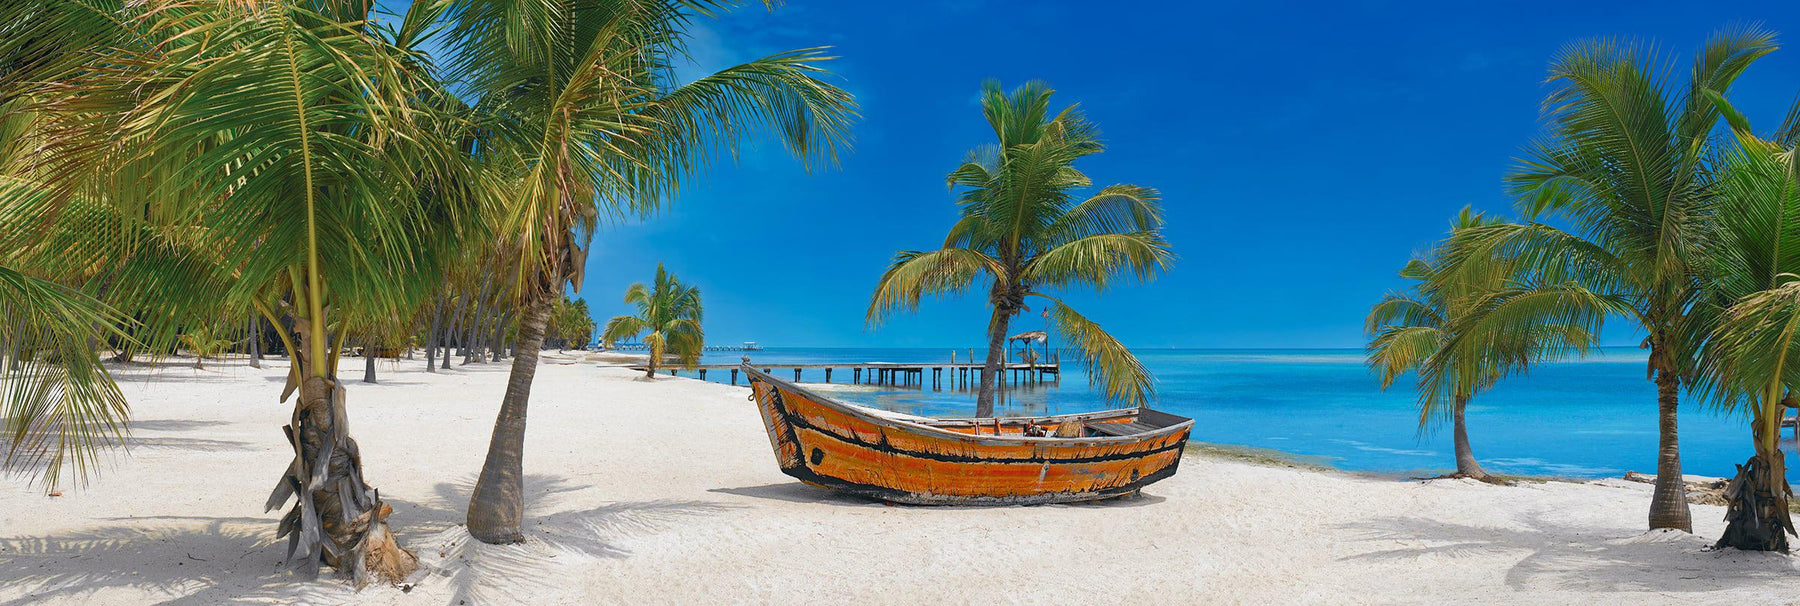 Old wooden boat sitting on a white sand beach full of palm trees with a jetty and the ocean in the background